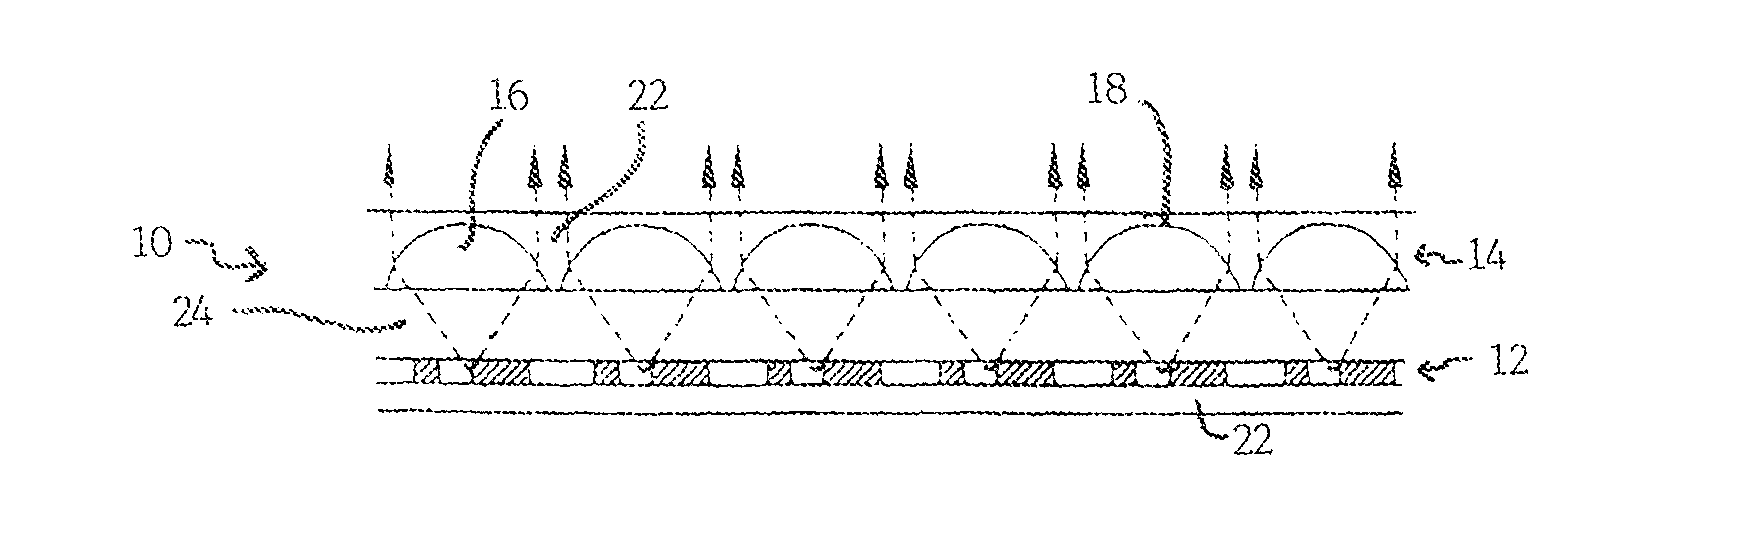 Optical system demonstrating improved resistance to optically degrading external effects